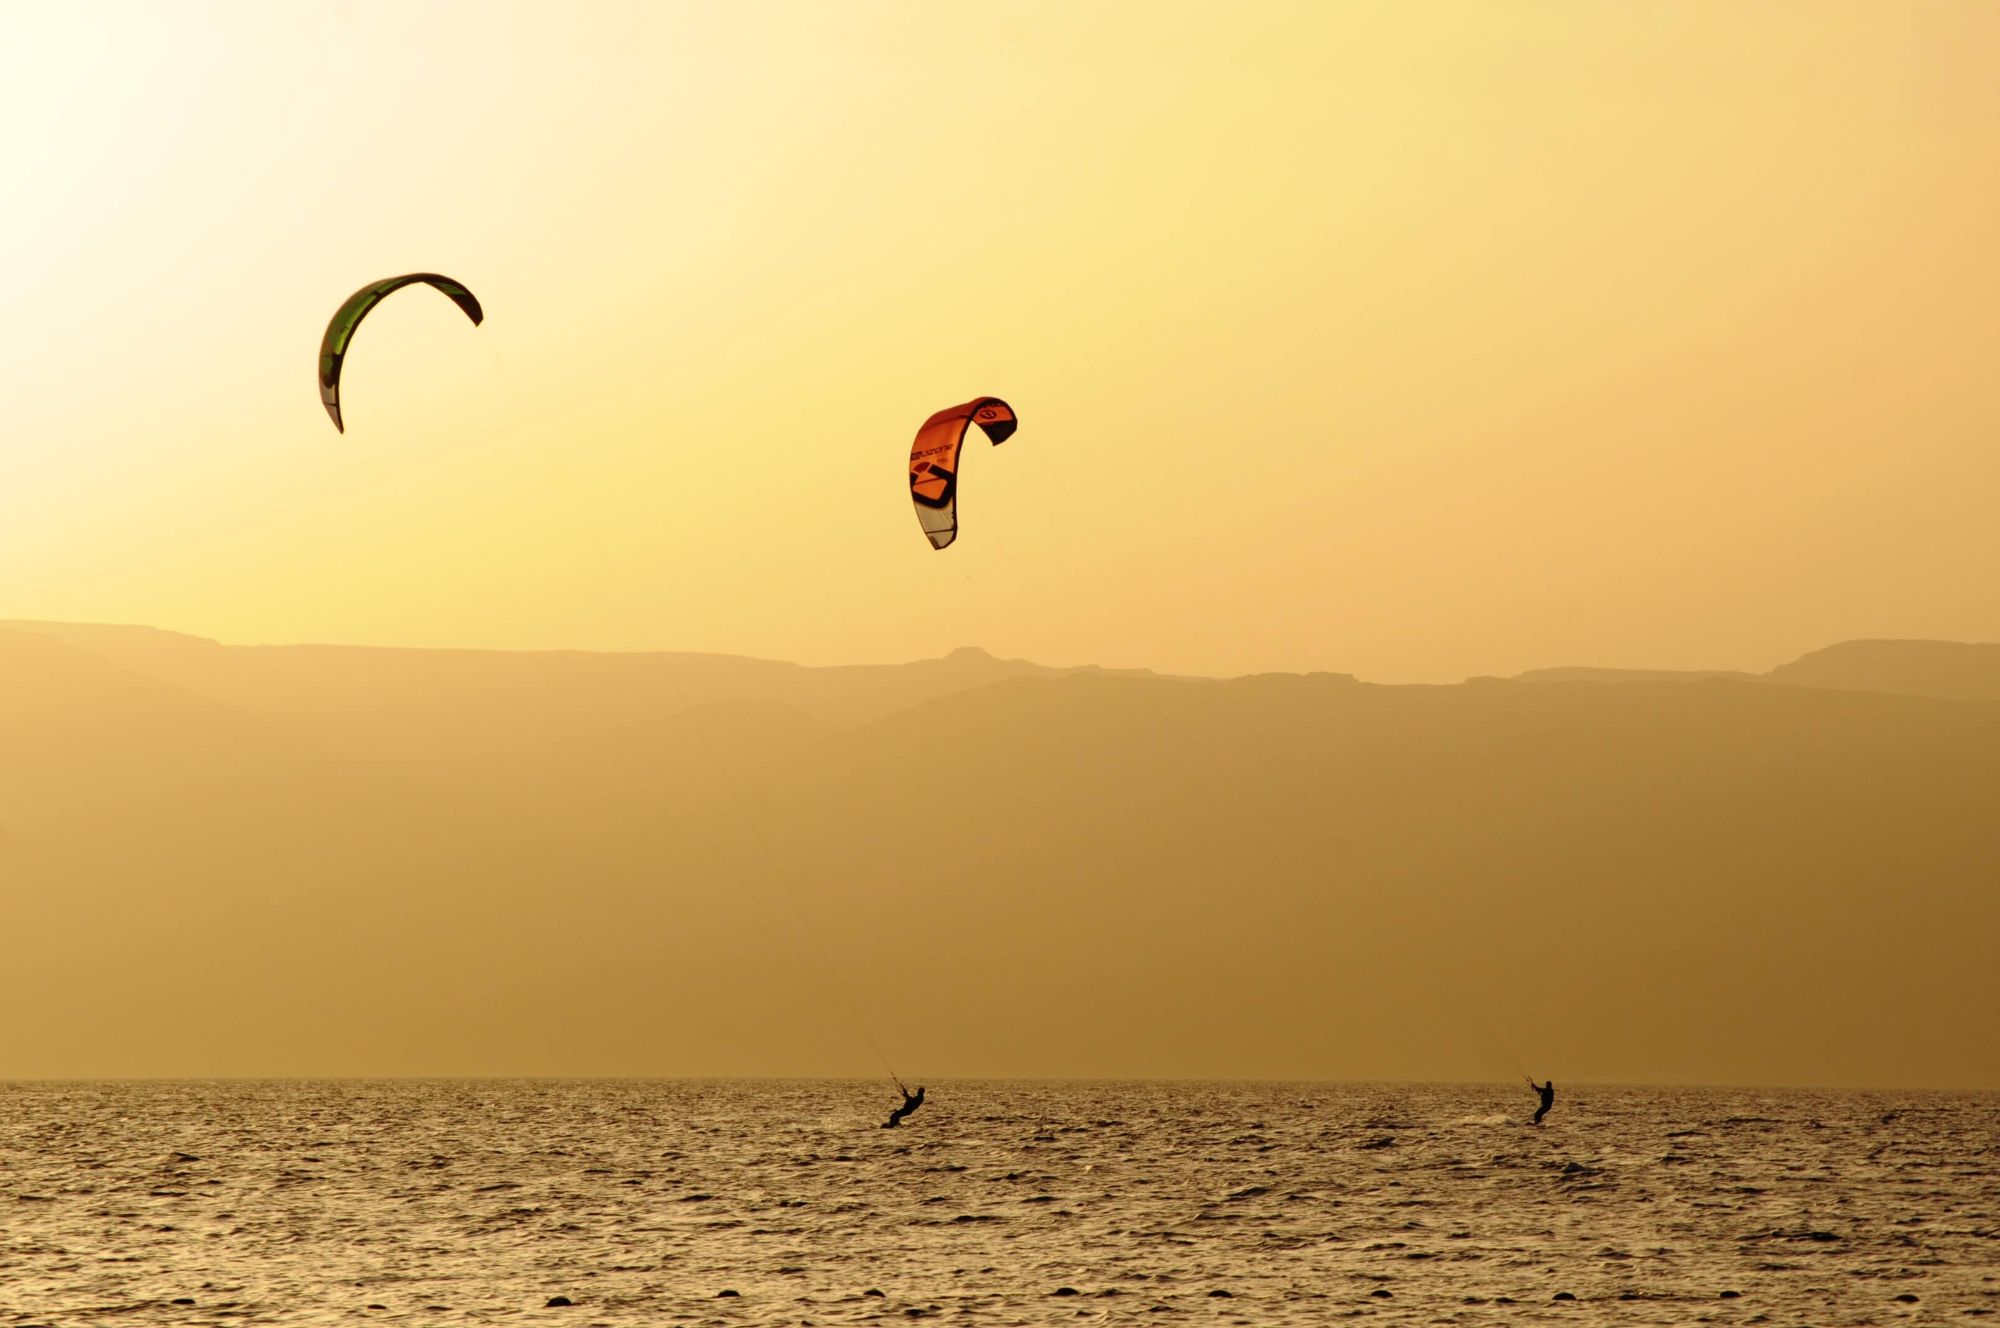 Two people are kitesurfing in the sunset